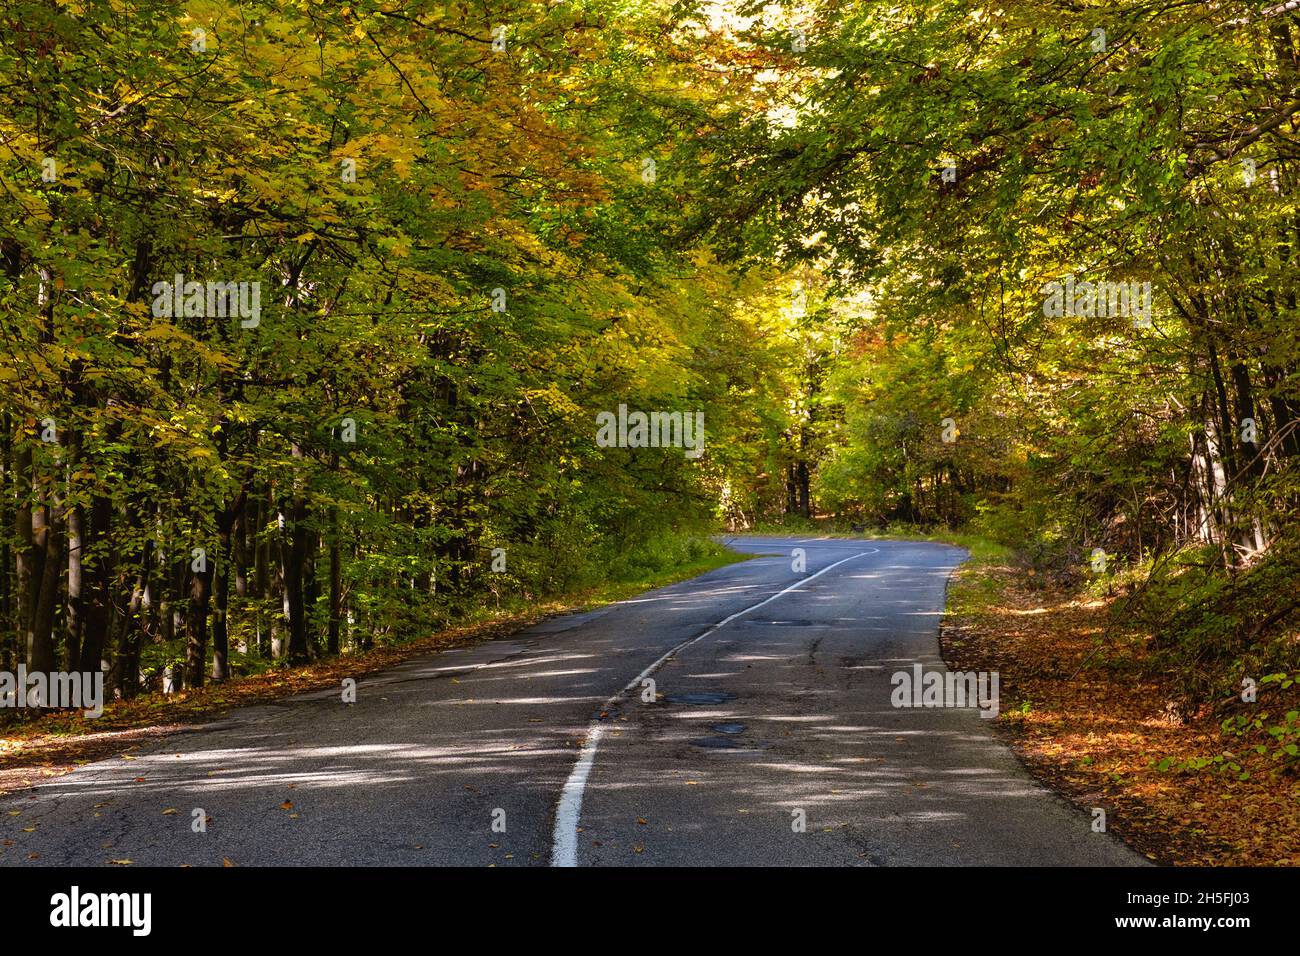 A road through the forest in autumn Stock Photo